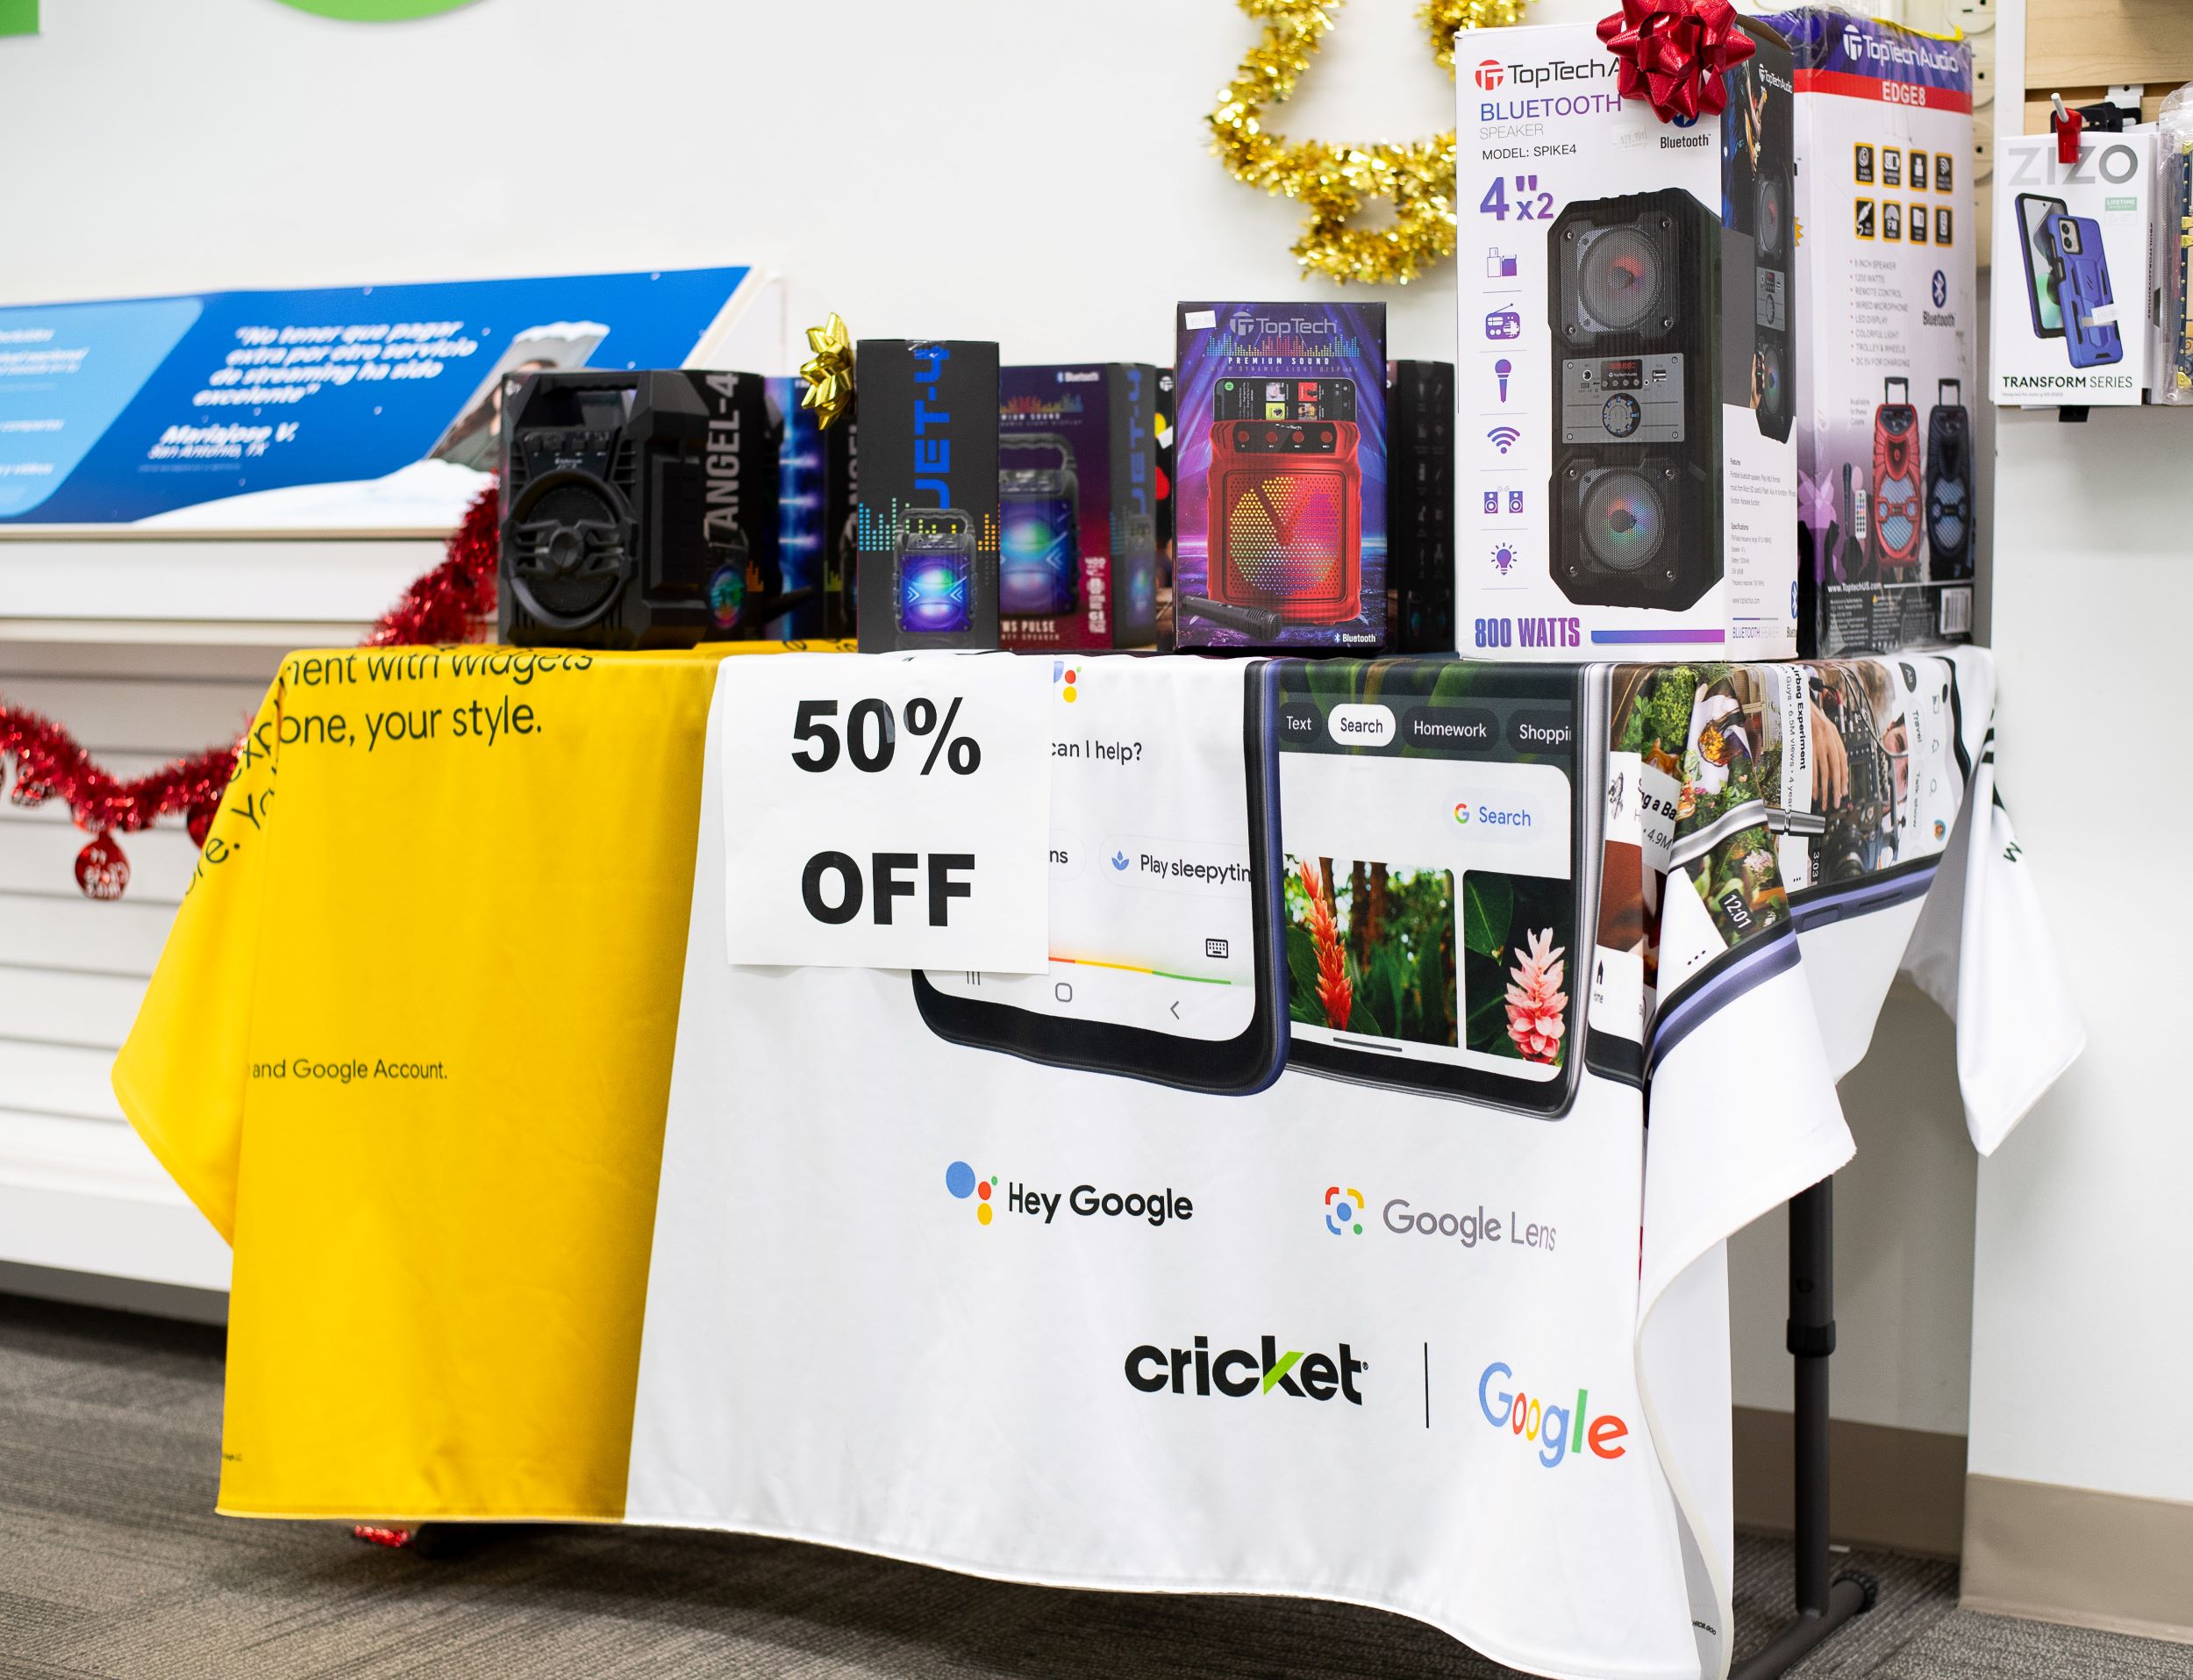 A display table at a cricket store featuring electronic gadgets, such as headphones and speakers, and promotional signs for a 50% off sale, adorned with google branding and holiday decorations.